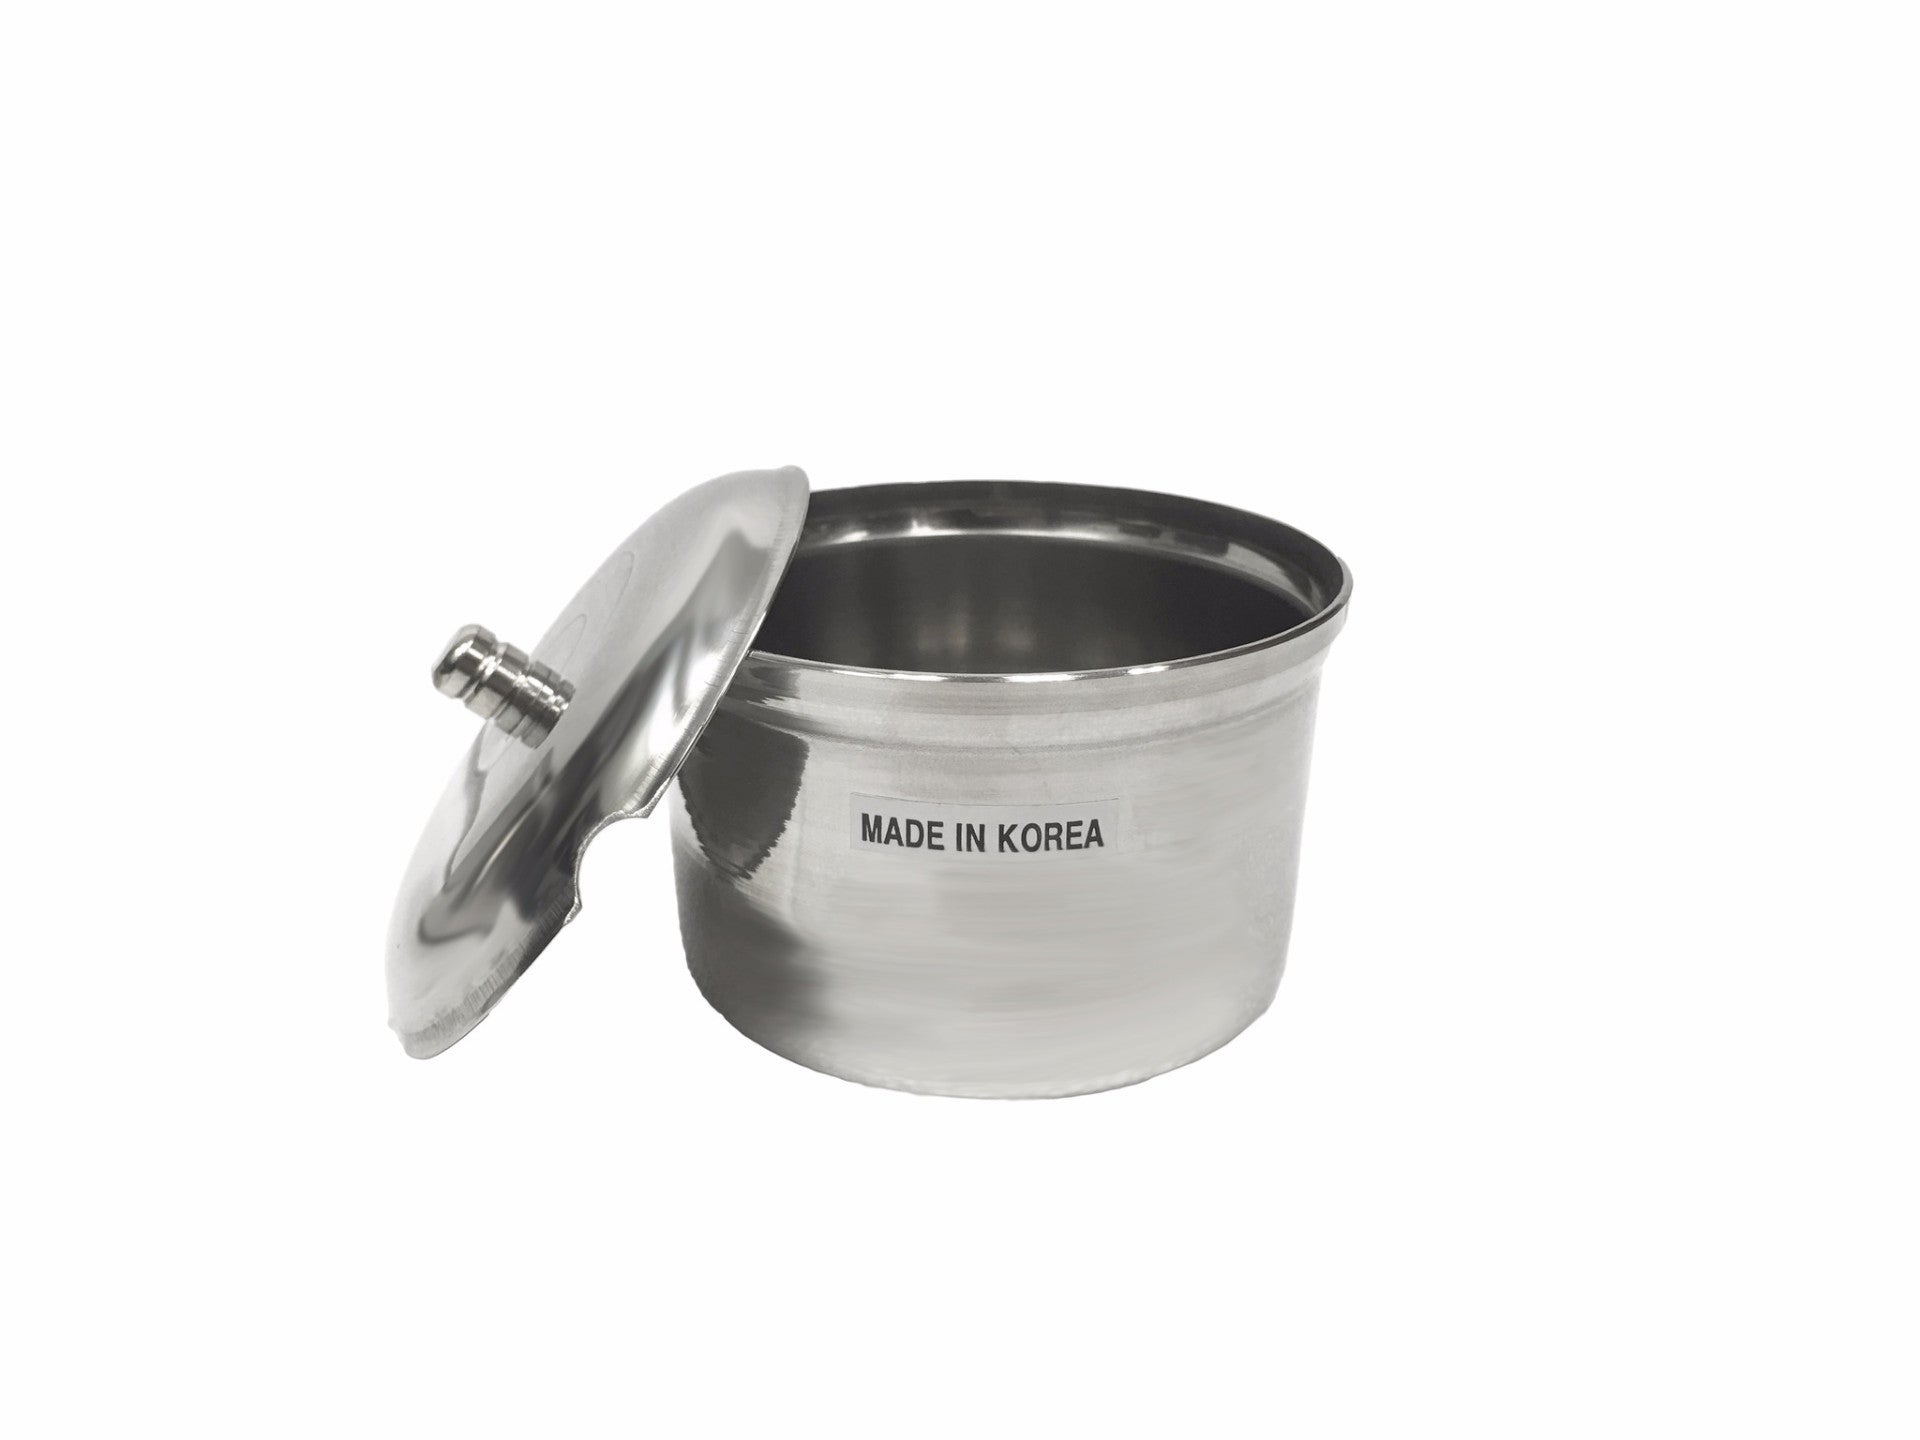 Stainless Steel Condiment Container with Spoon Slot (양념 통), Tabletop - eKitchenary